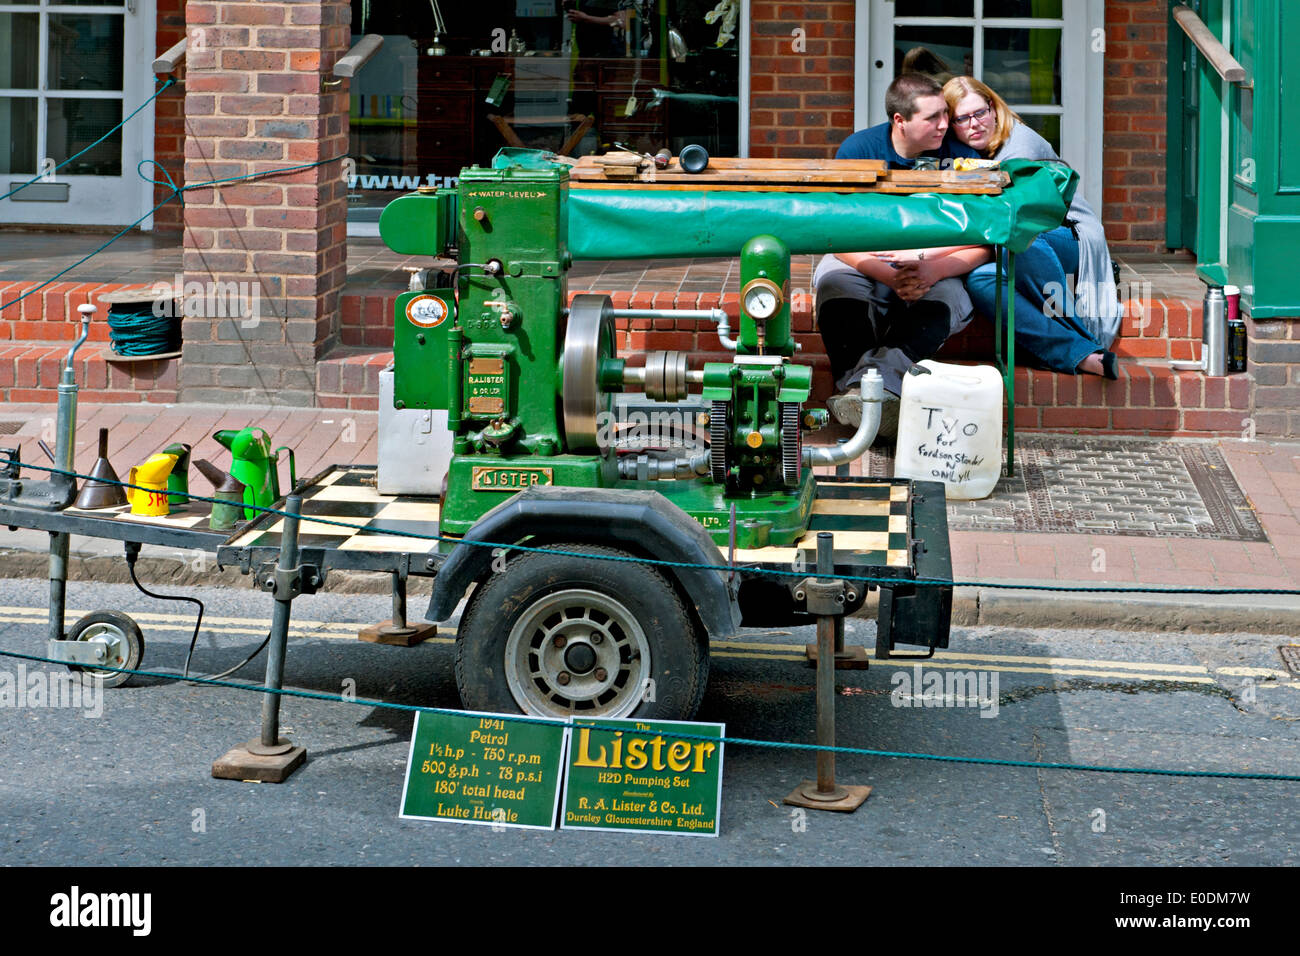 Stationary engine enthusiasts display their machines at a town fair Stock Photo